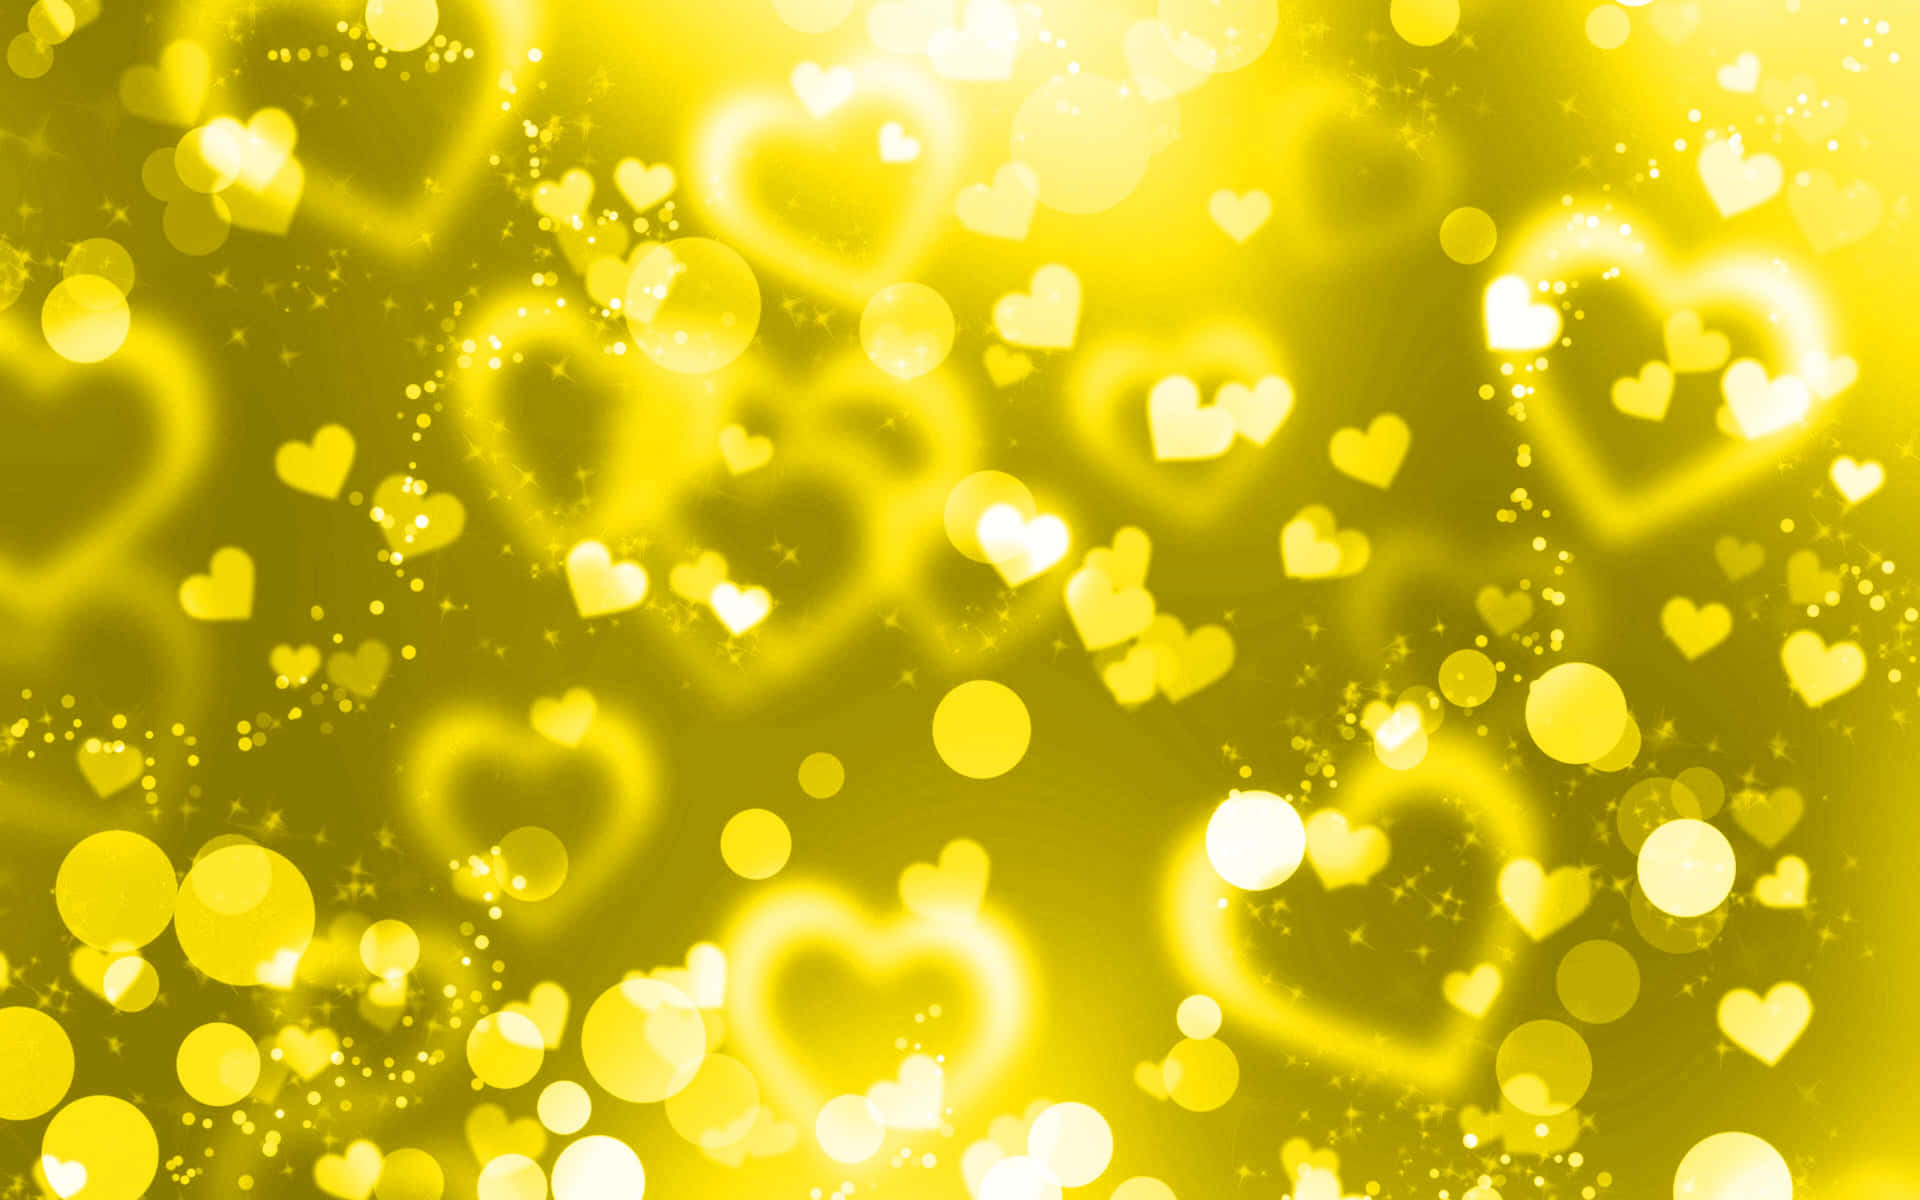 Vibrant Yellow Heart on Grayscale Background Wallpaper